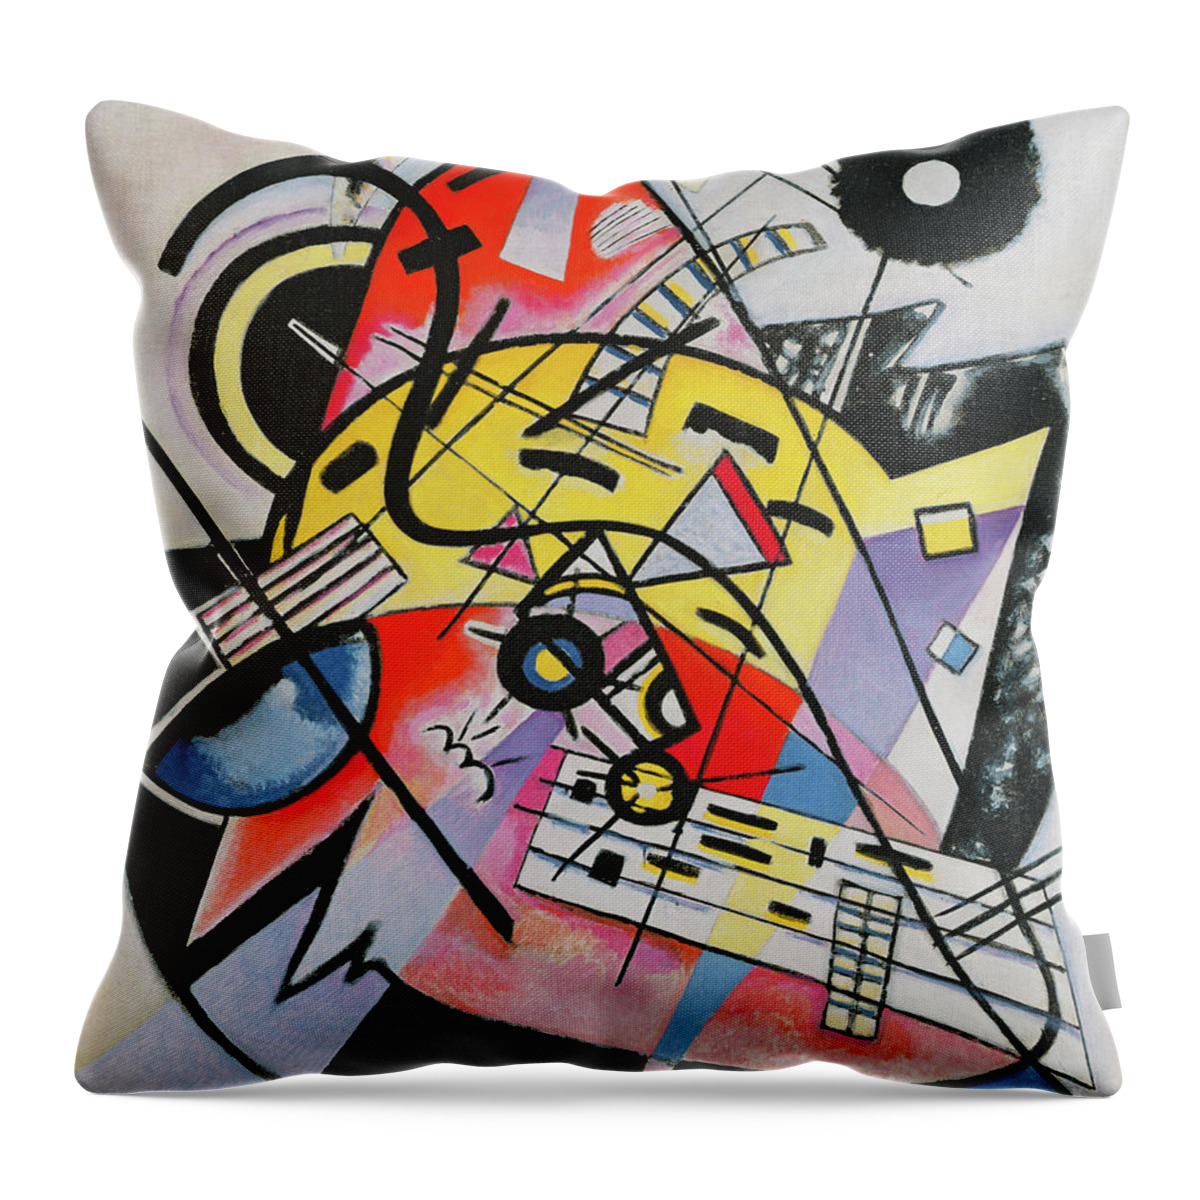 Wassily Kandinsky Throw Pillow featuring the painting White Point, 1923 by Wassily Kandinsky